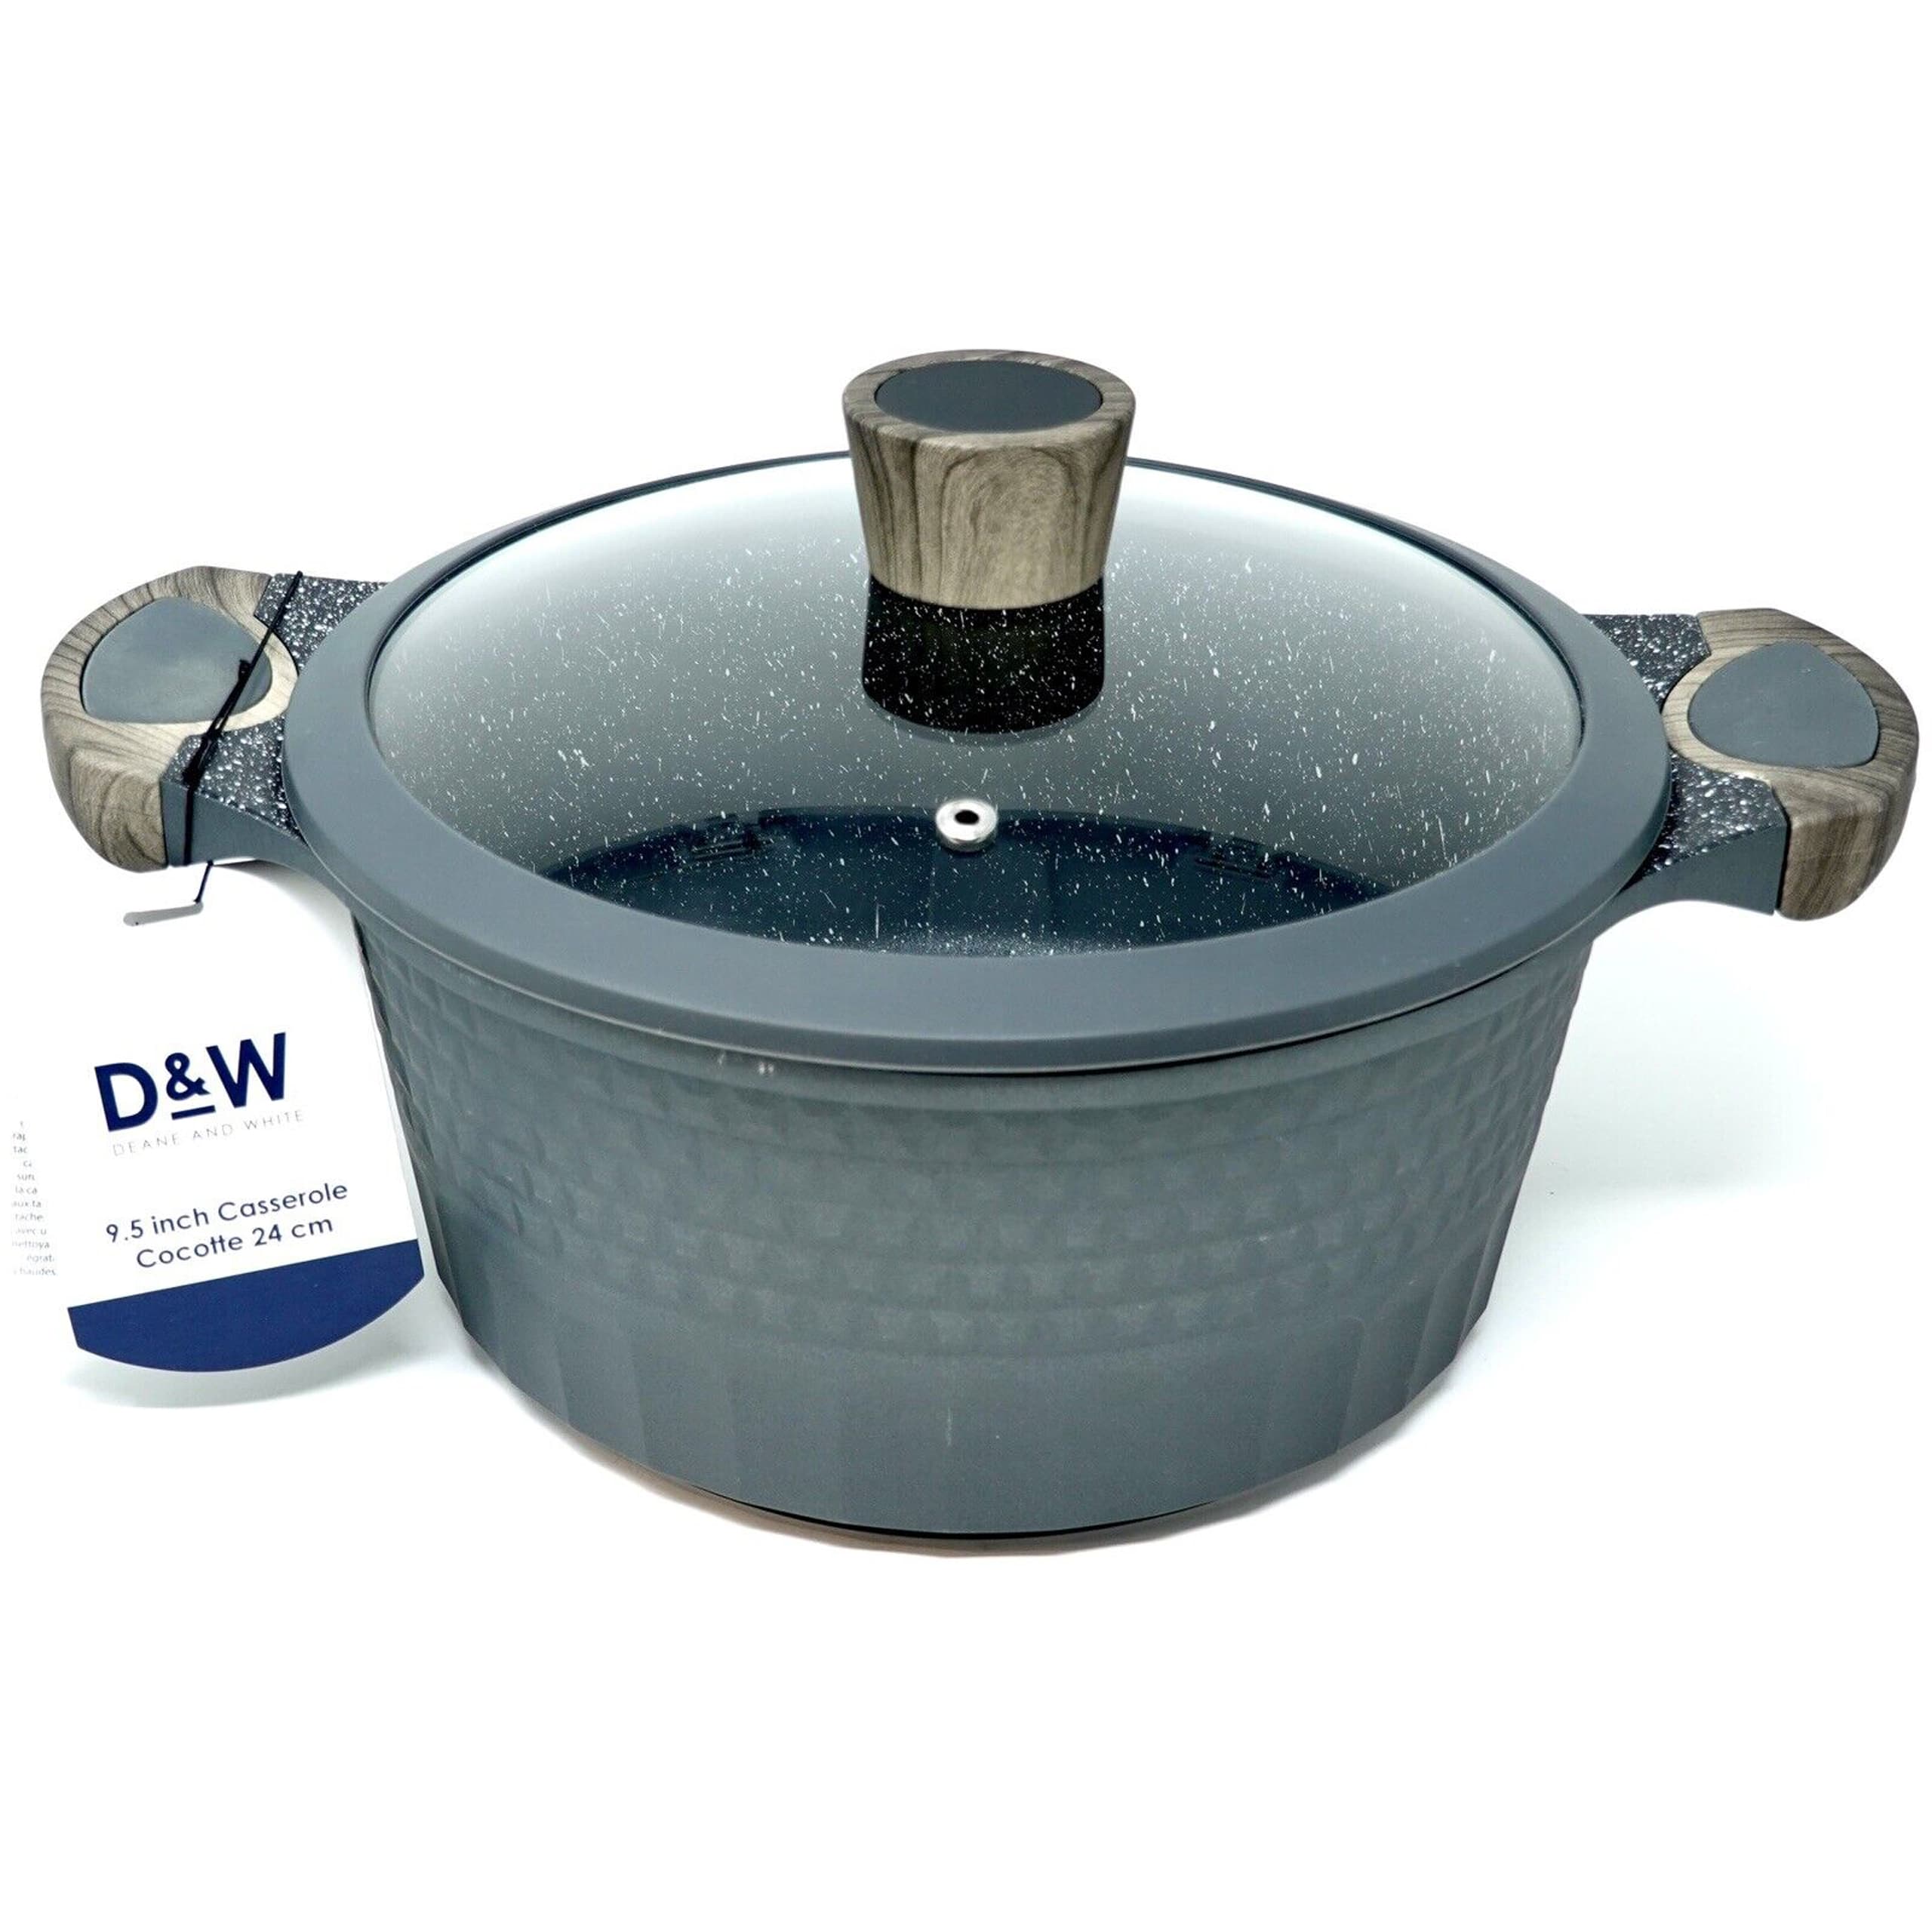 D&W 12 All-in-One WOK With Lid - Deane and White Cookware